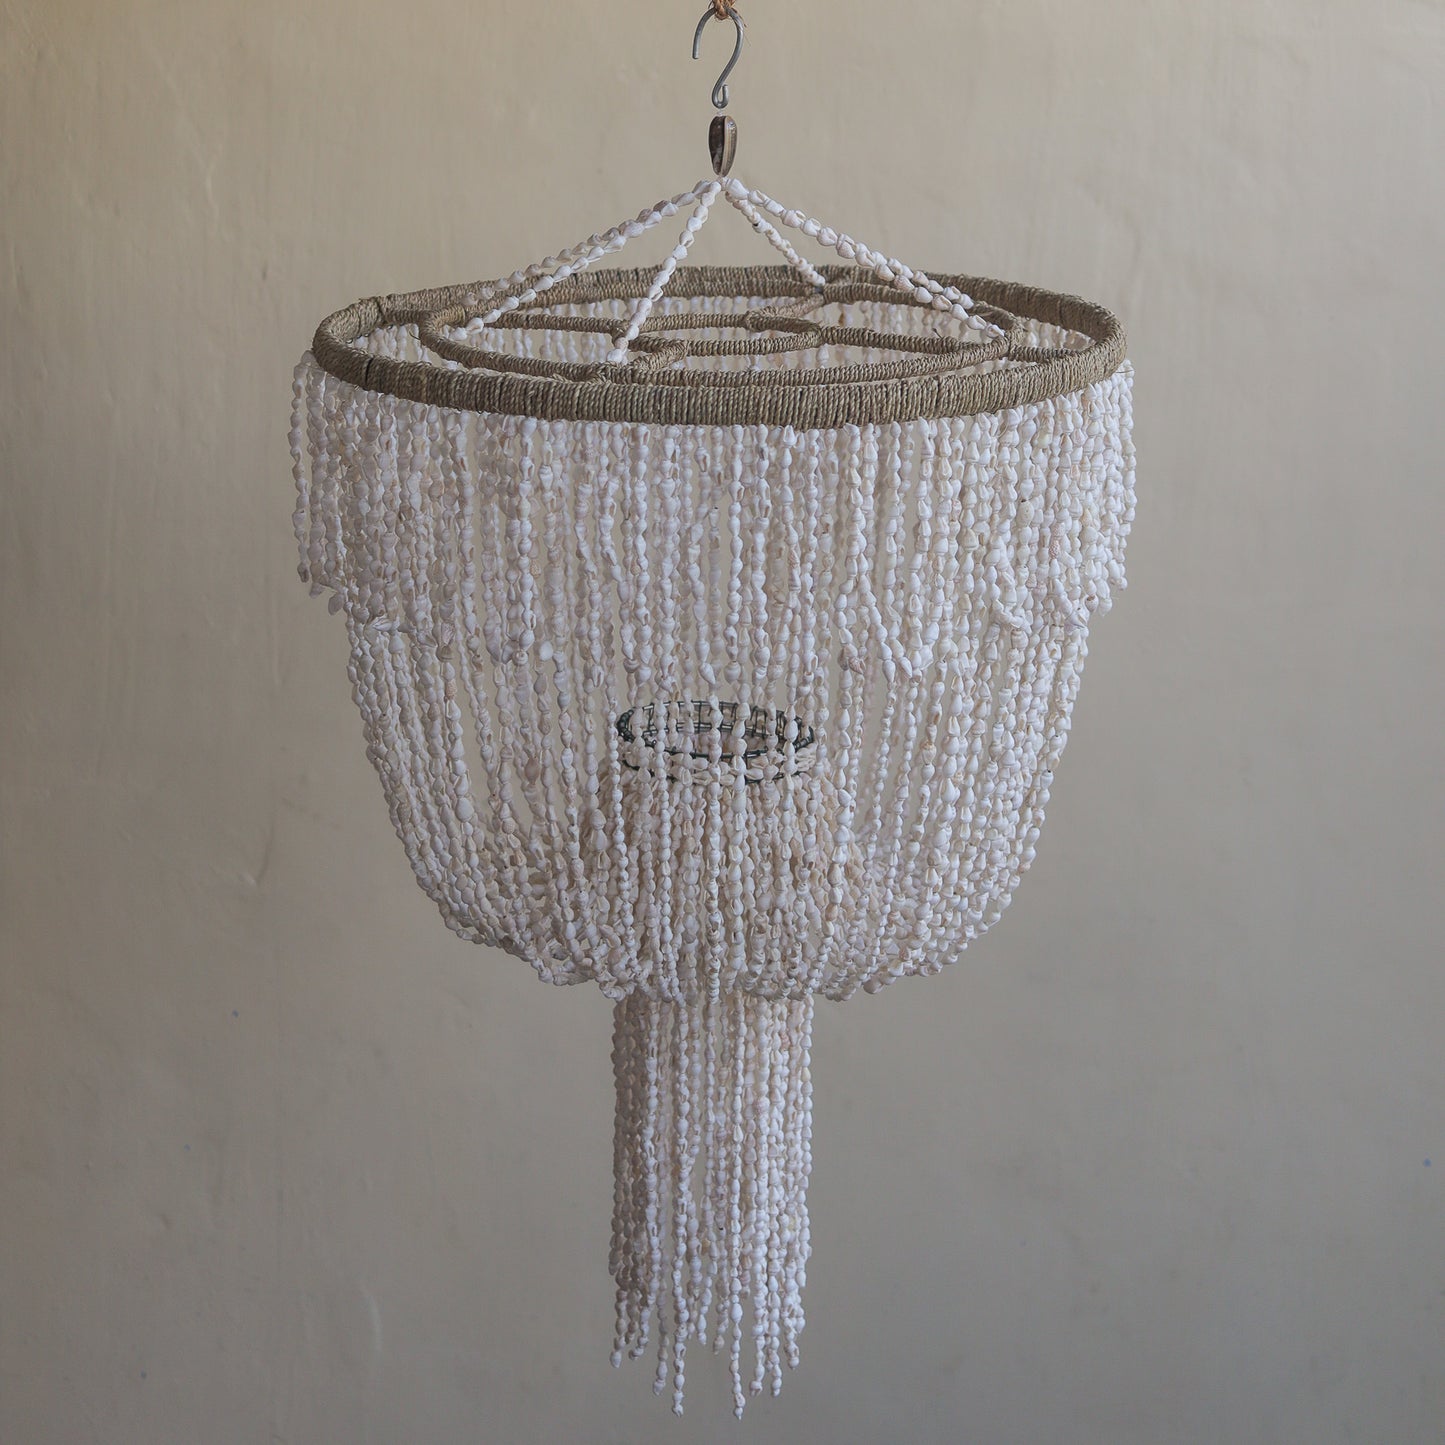 small Chandelier made by seashell